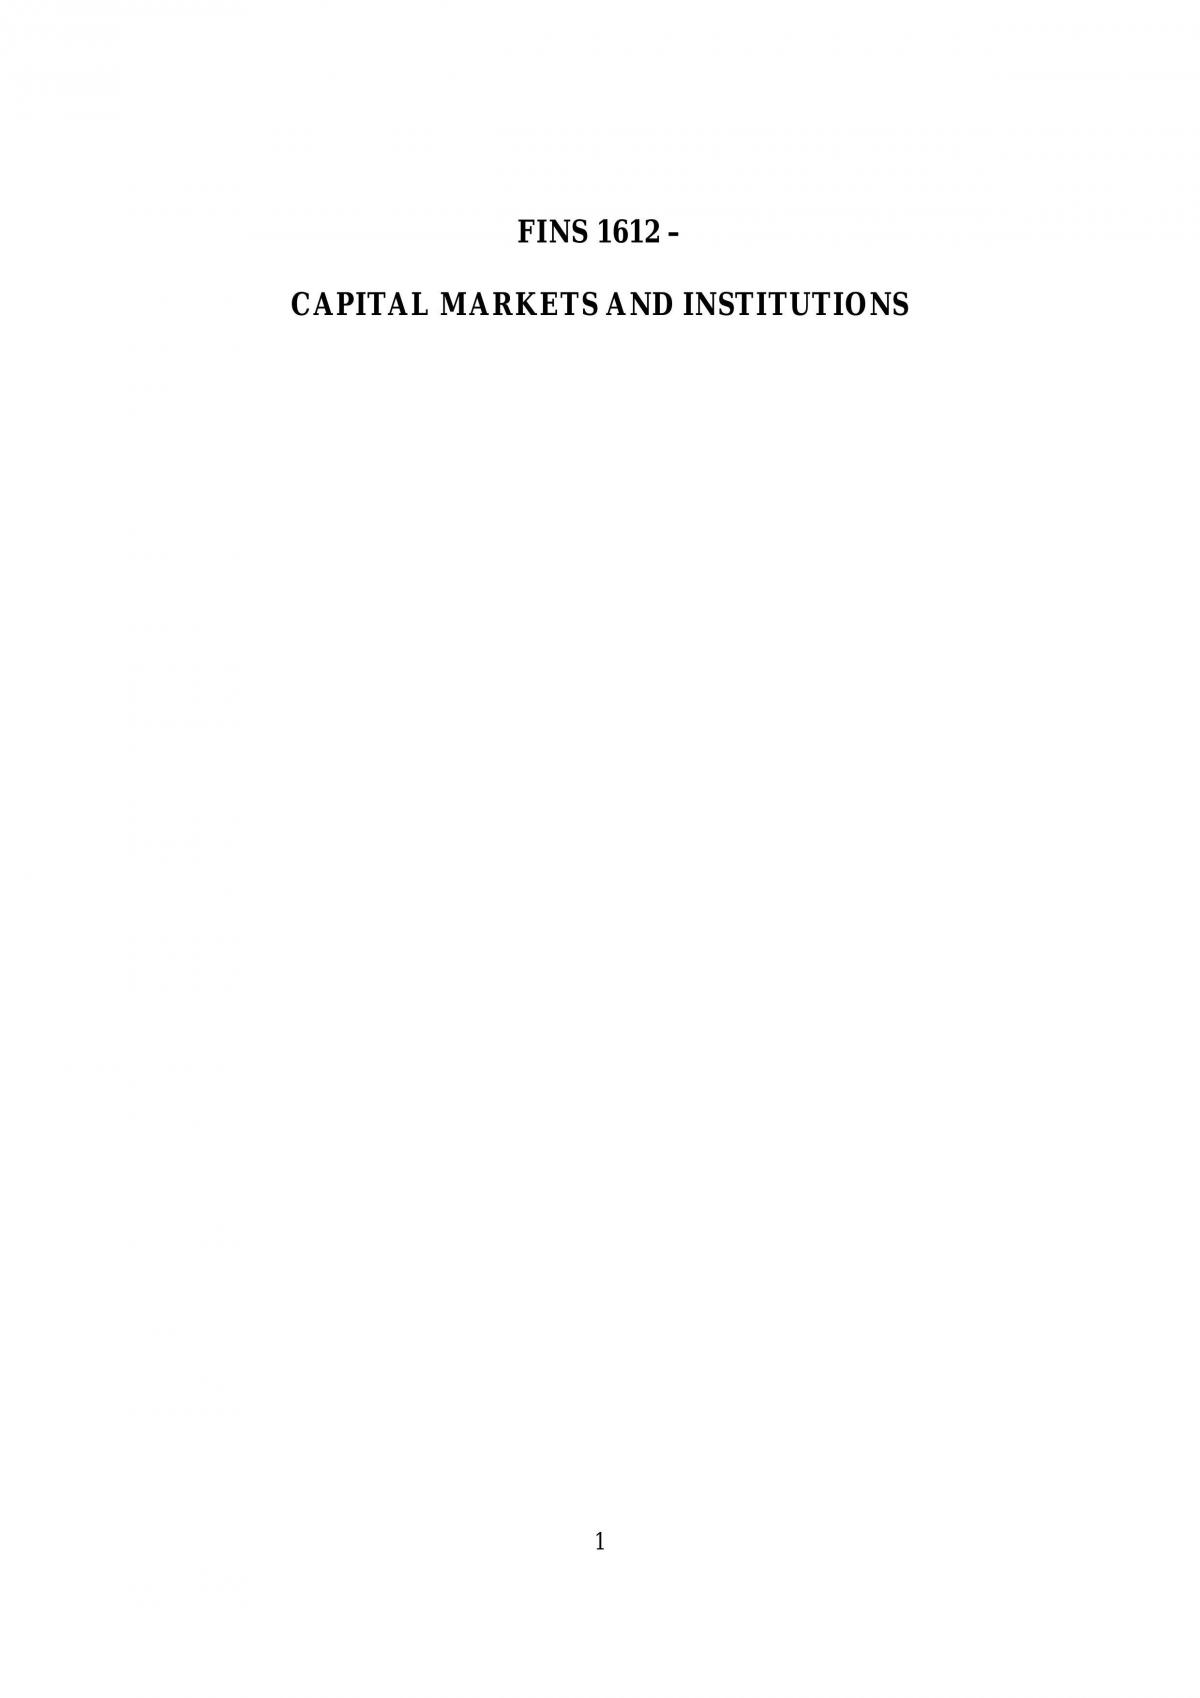 Capital Markets And Institutions - Page 1